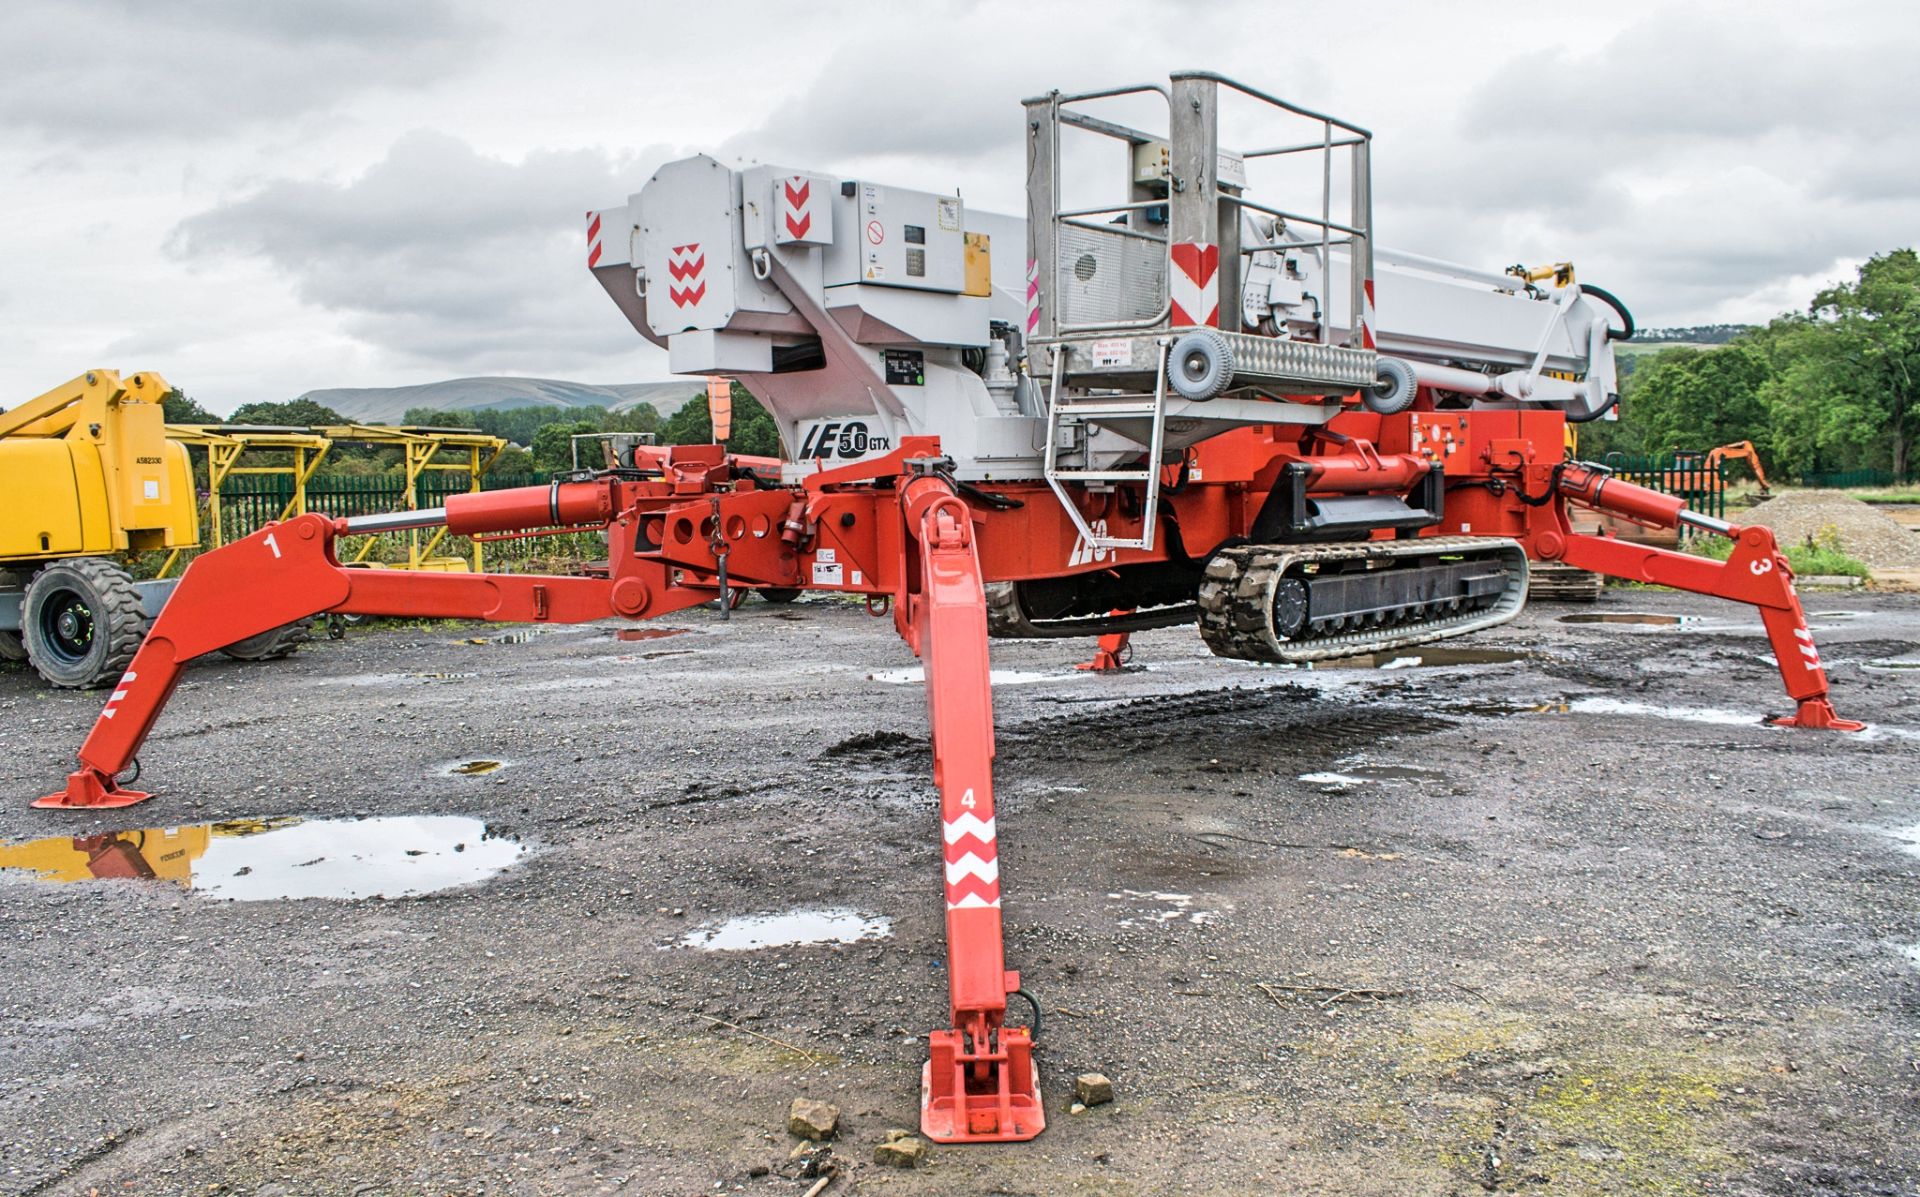 Teupen Leo 50 GTX 50 metre rubber tracked aerial platform Year: 2008 S/N: 140740 Recorded Hours: - Image 17 of 39